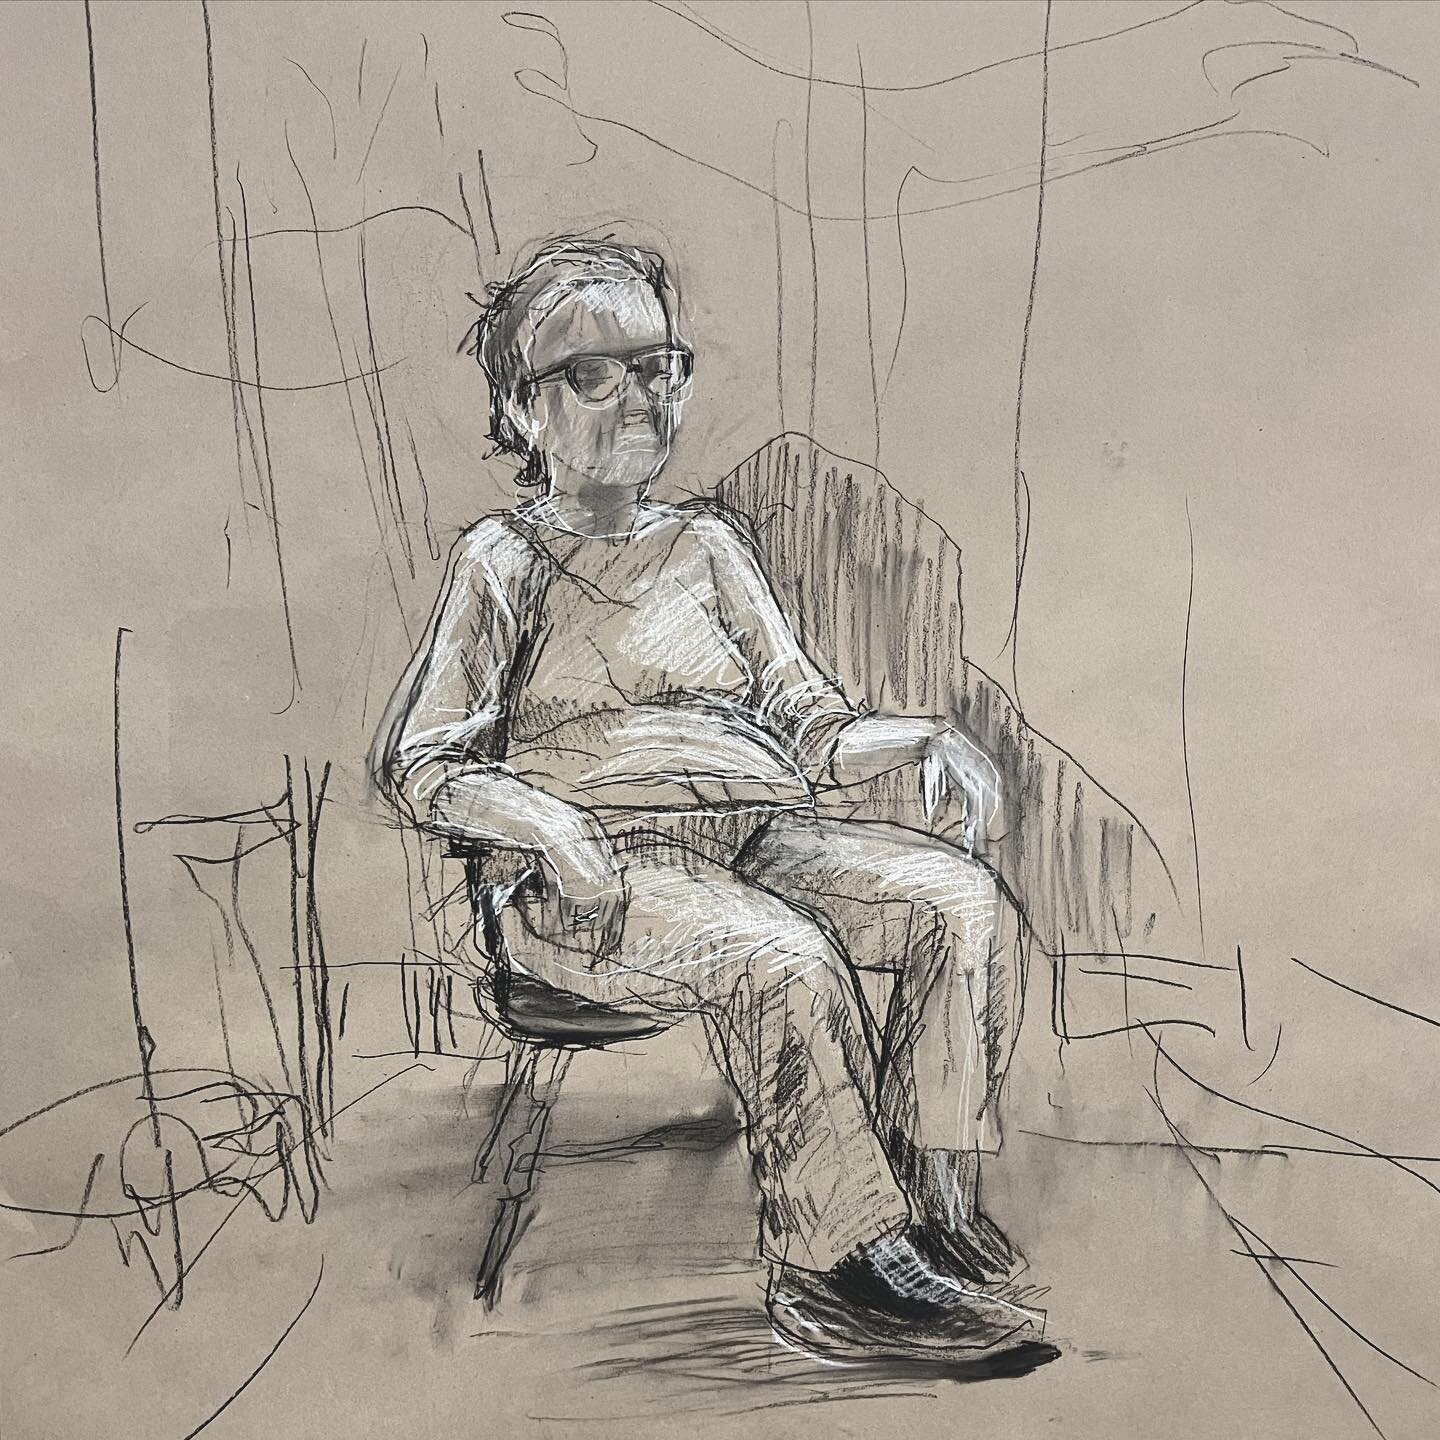 Big thanks to Sue for sitting with me today! 
&amp; a second thanks to everyone that will be sitting with me soon. ✏️ 📄 
.
#art #artwork #artist #draw #drawing #drawings #figure #figuredrawing #figurativeart #figurative #sketch #sketching #sketches 